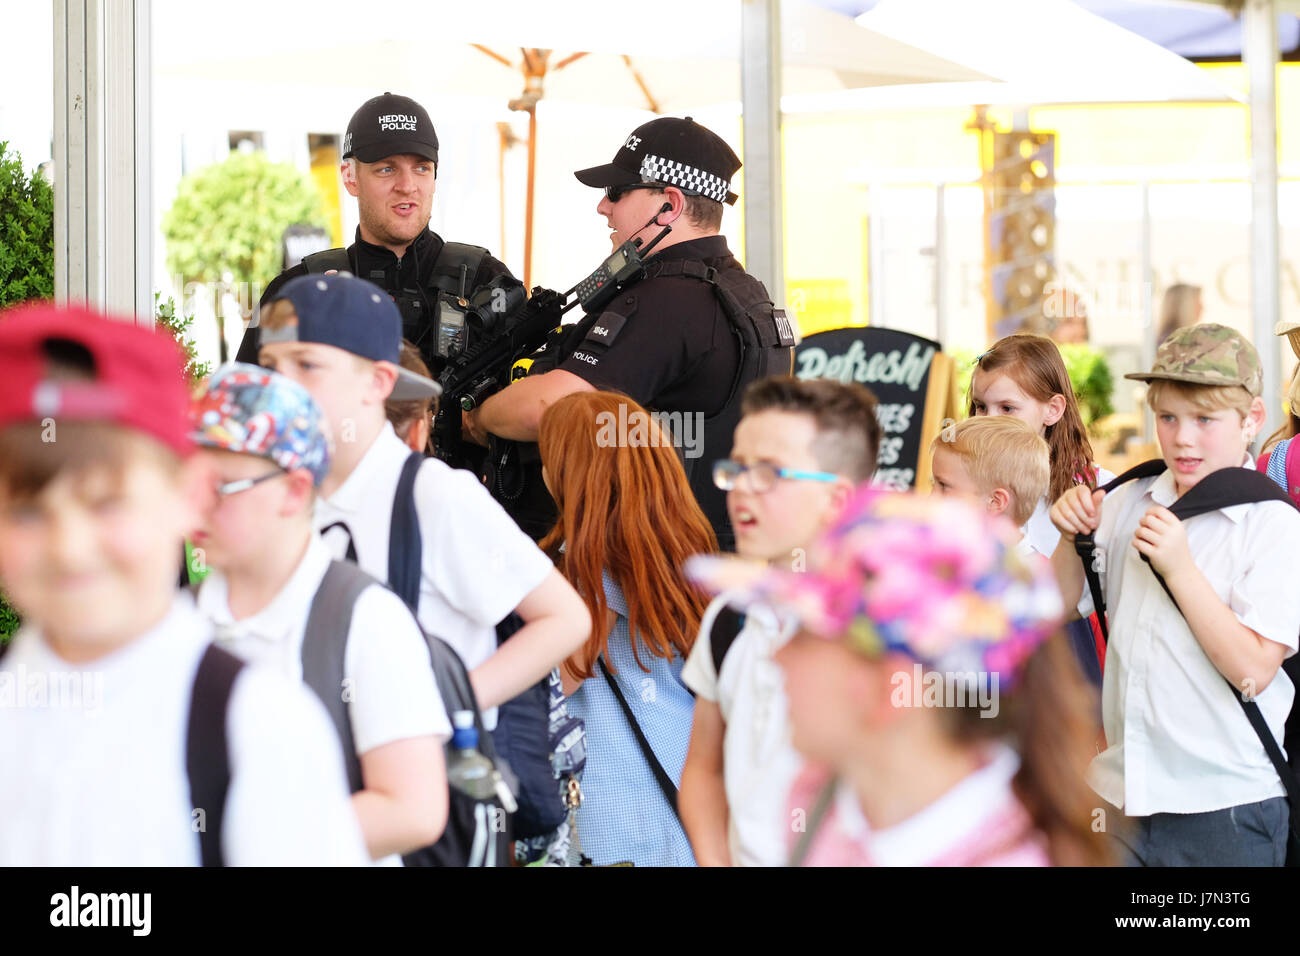 Hay Festival 2017 - Hay on Wye, Wales, UK - May 2017 - Armed police officers patrol the  opening day of this years Hay Festival which celebrates its 30th anniversary in 2017. Over 3,000 primary school children will attend Day 1 of the literary festival that runs until June 4th.  Credit: Steven May/Alamy Live News Stock Photo